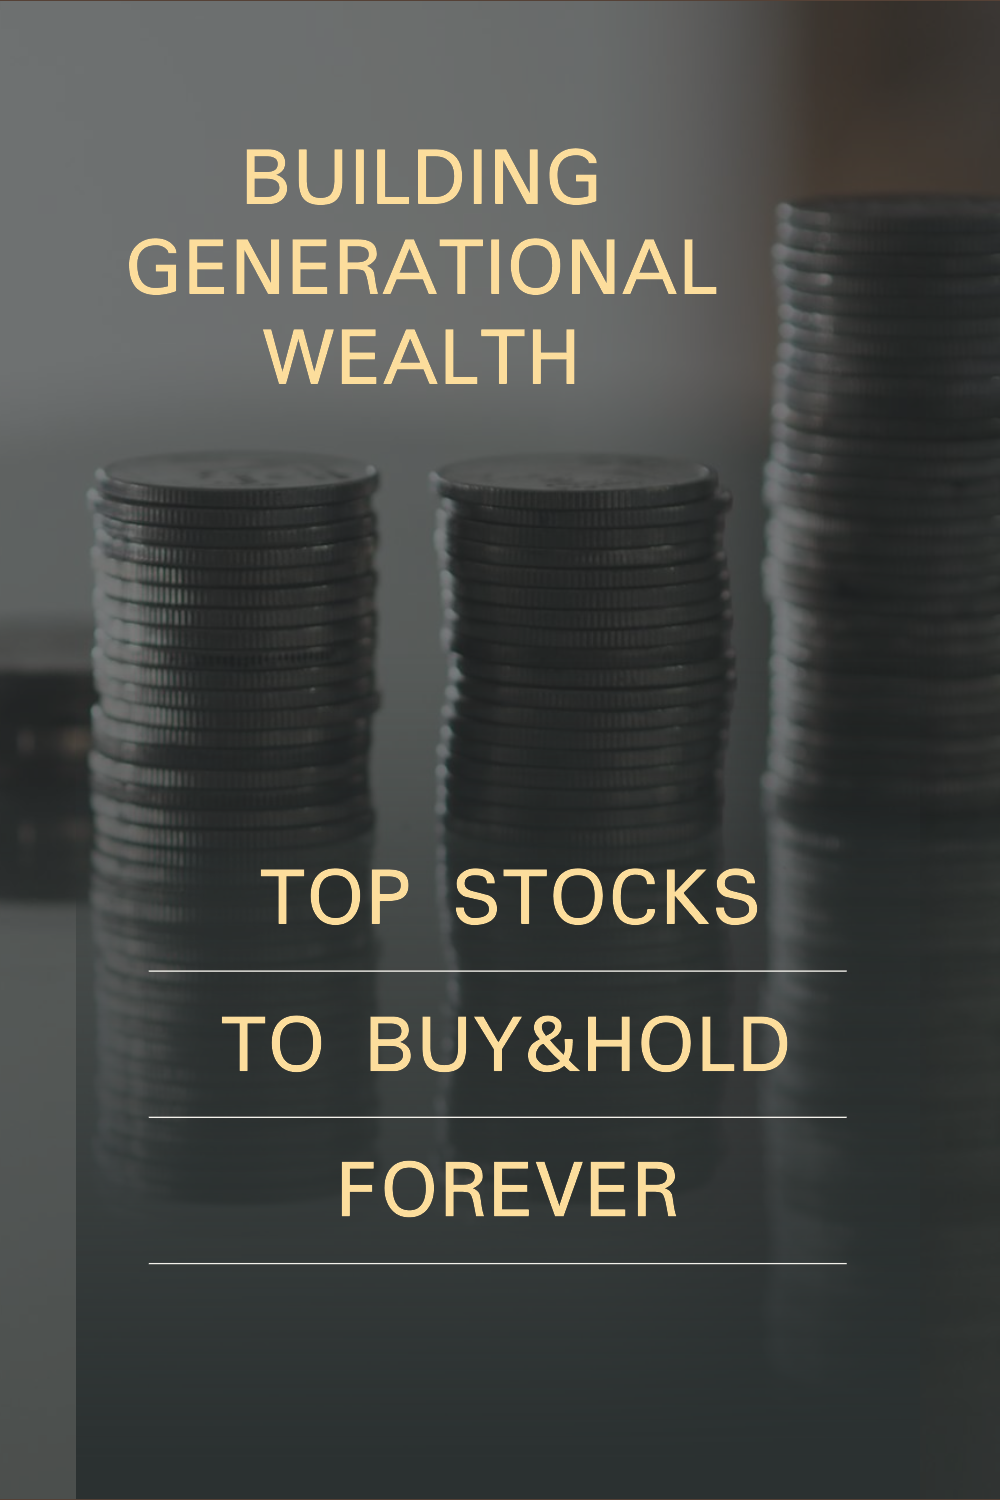 Building generational wealth: Top stocks to Buy&Hold forever